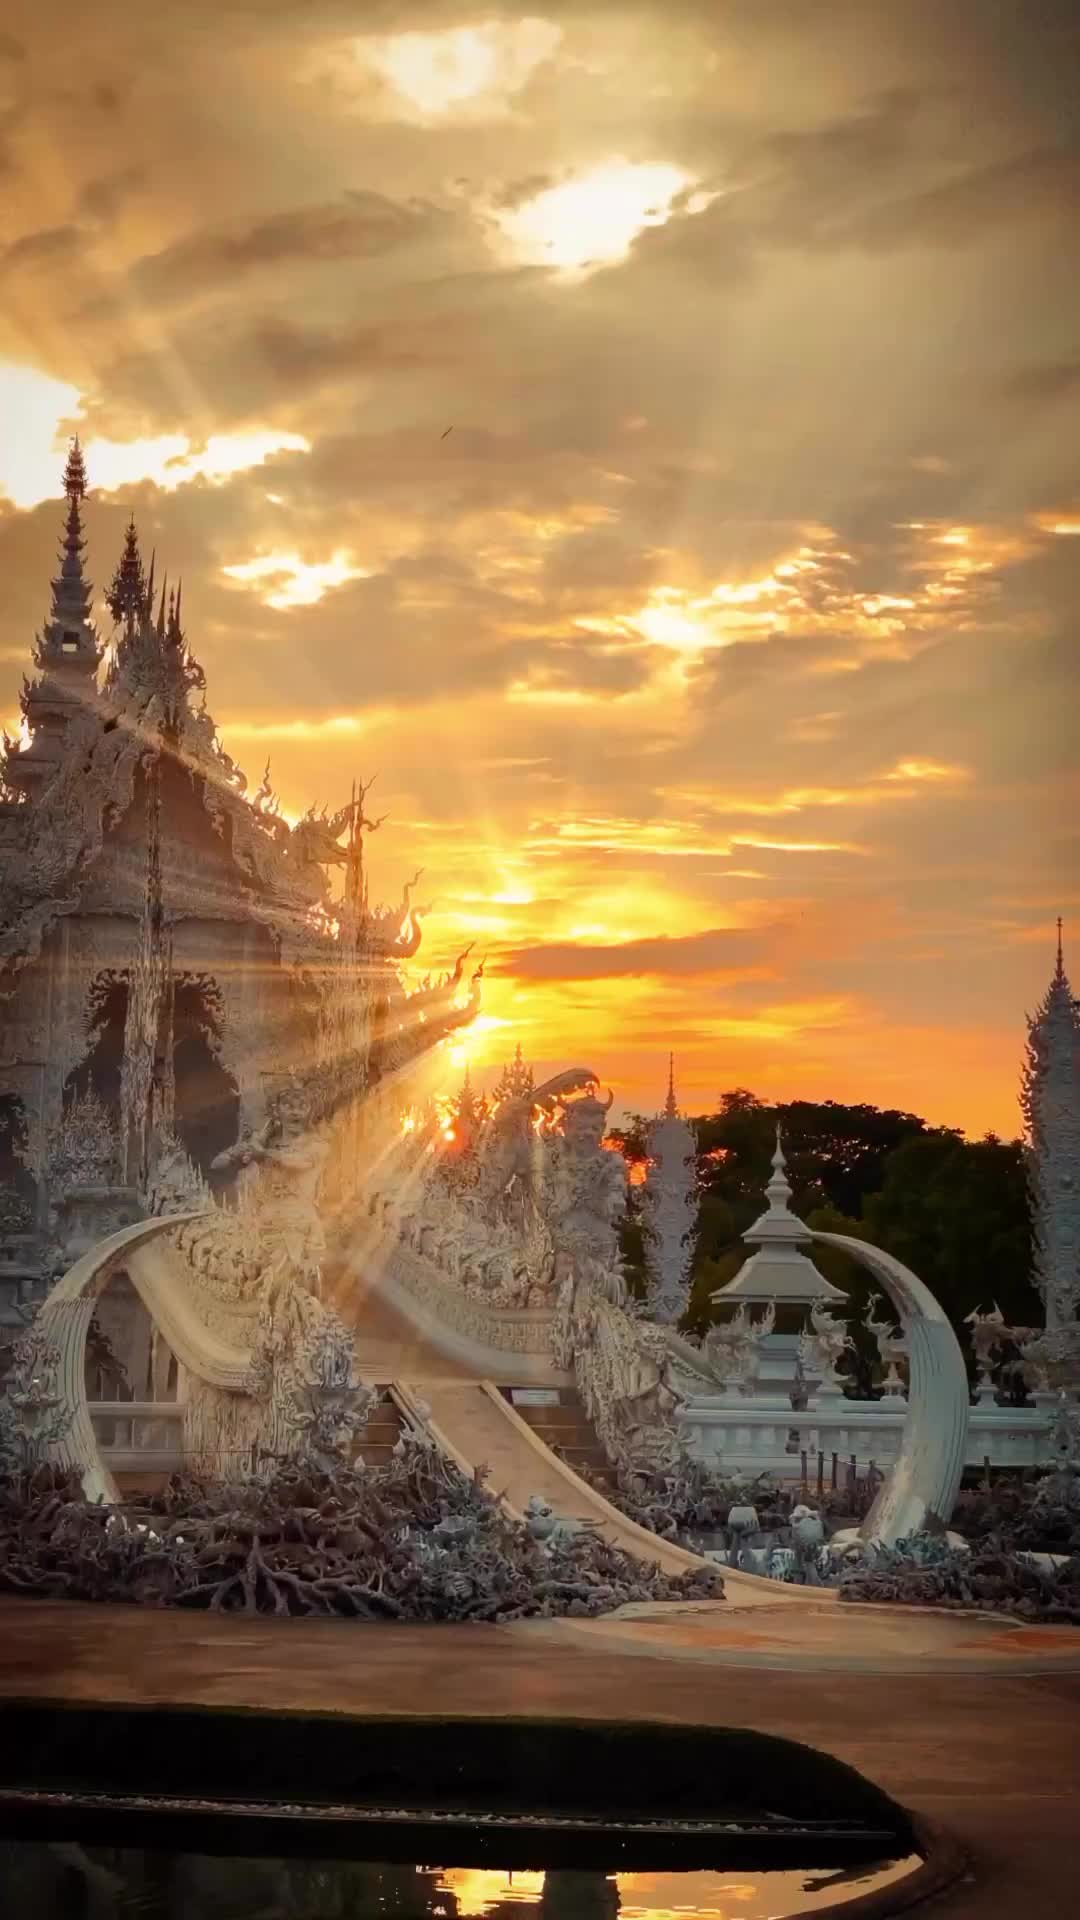 Discover the Stunning White Temple in Chiang Rai